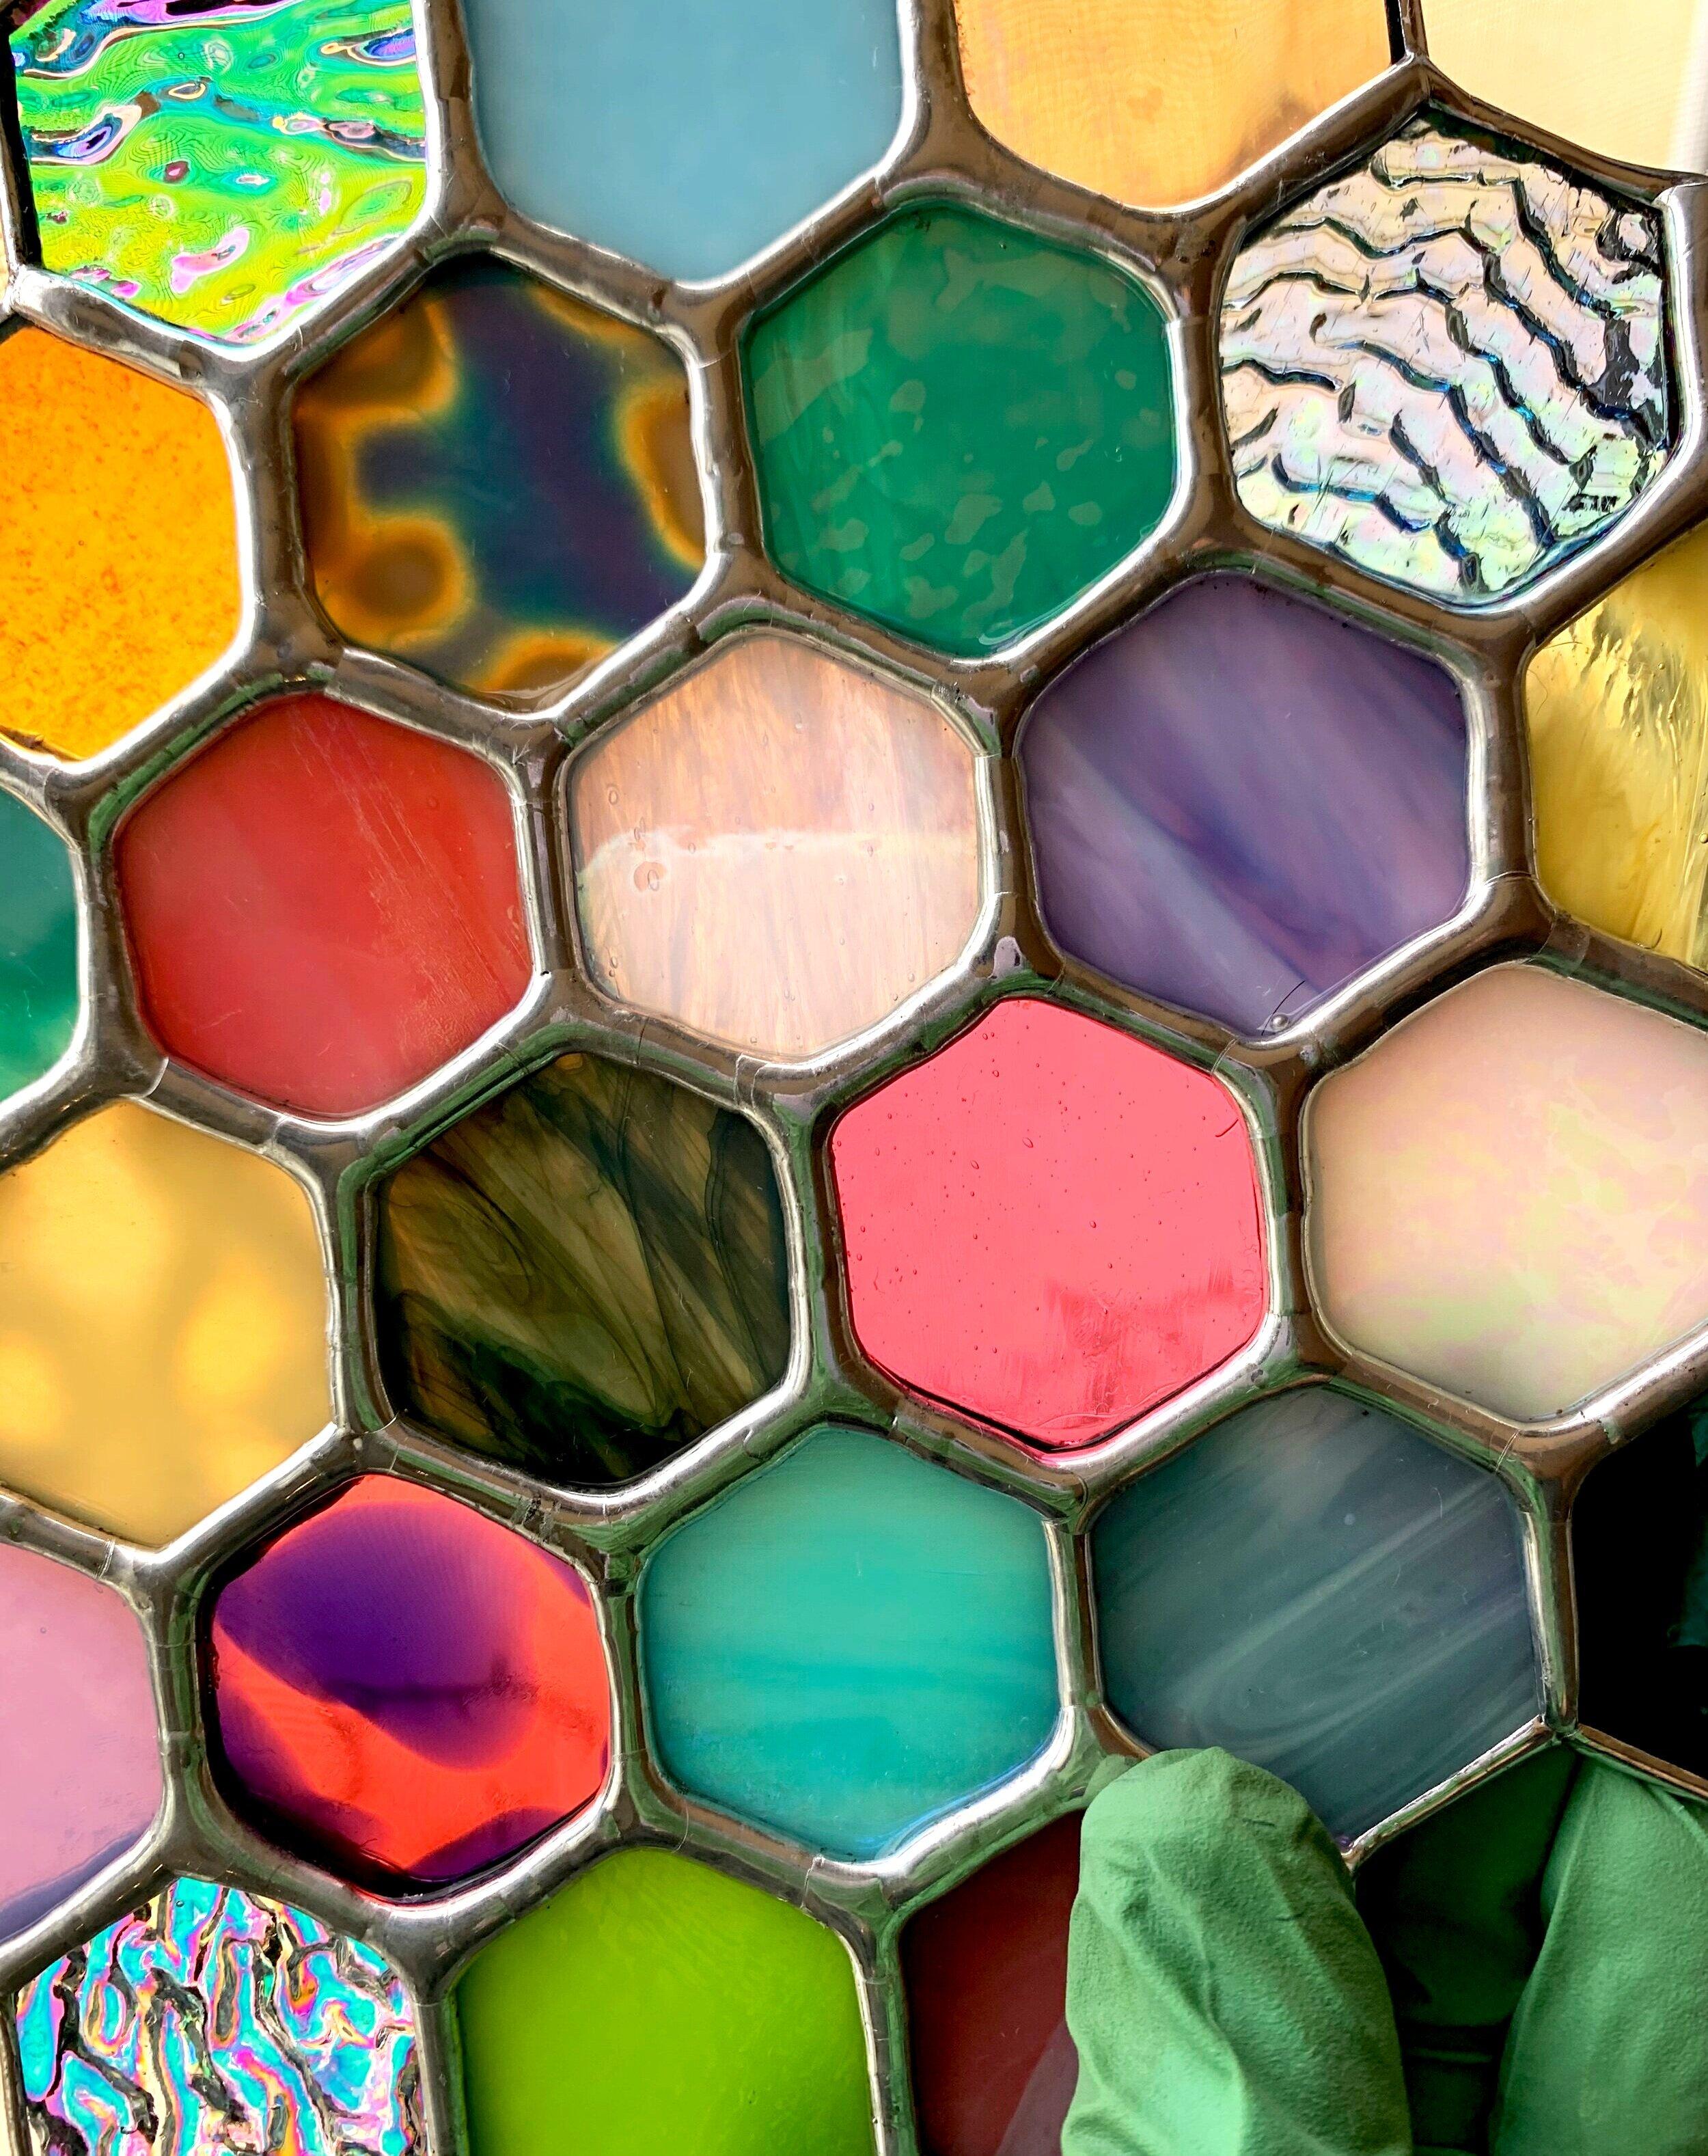 Stained glass hexagons with different colors and patterns coming together